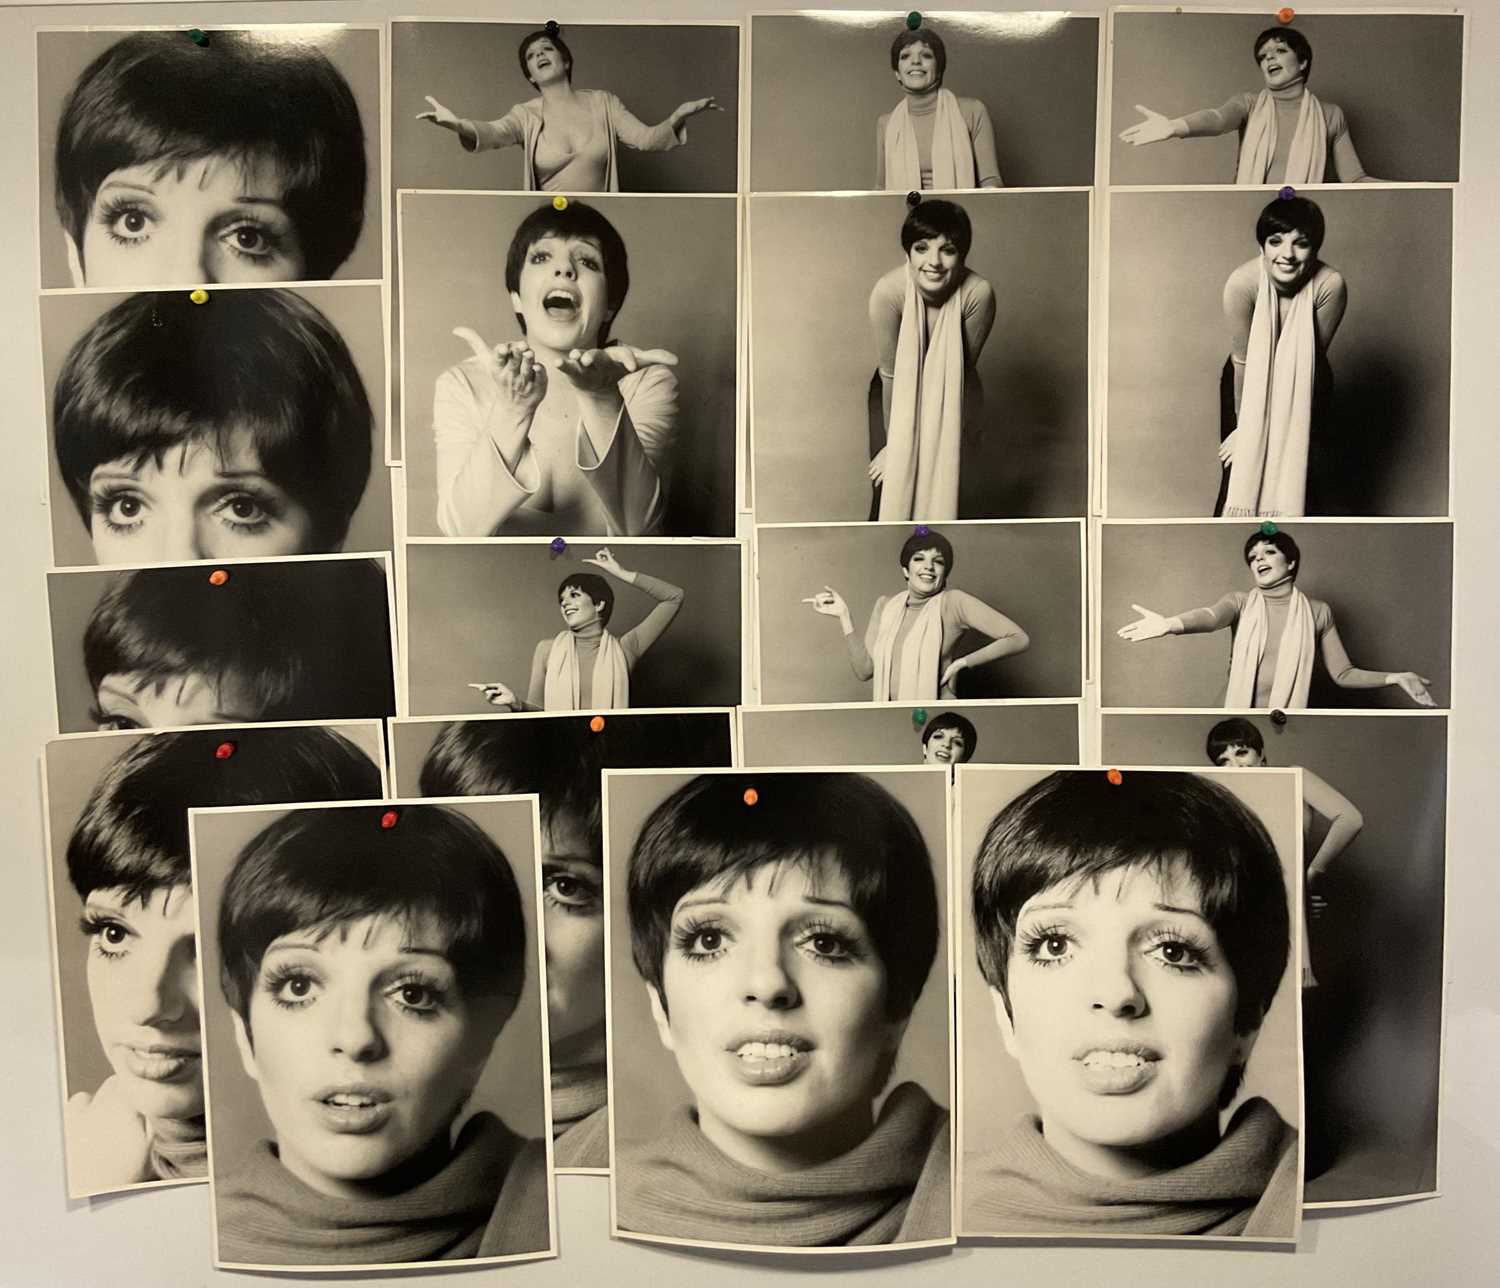 FROM THE ESTATE OF LIZA MINELLI - A collection of 19 large size original photographic portraits by